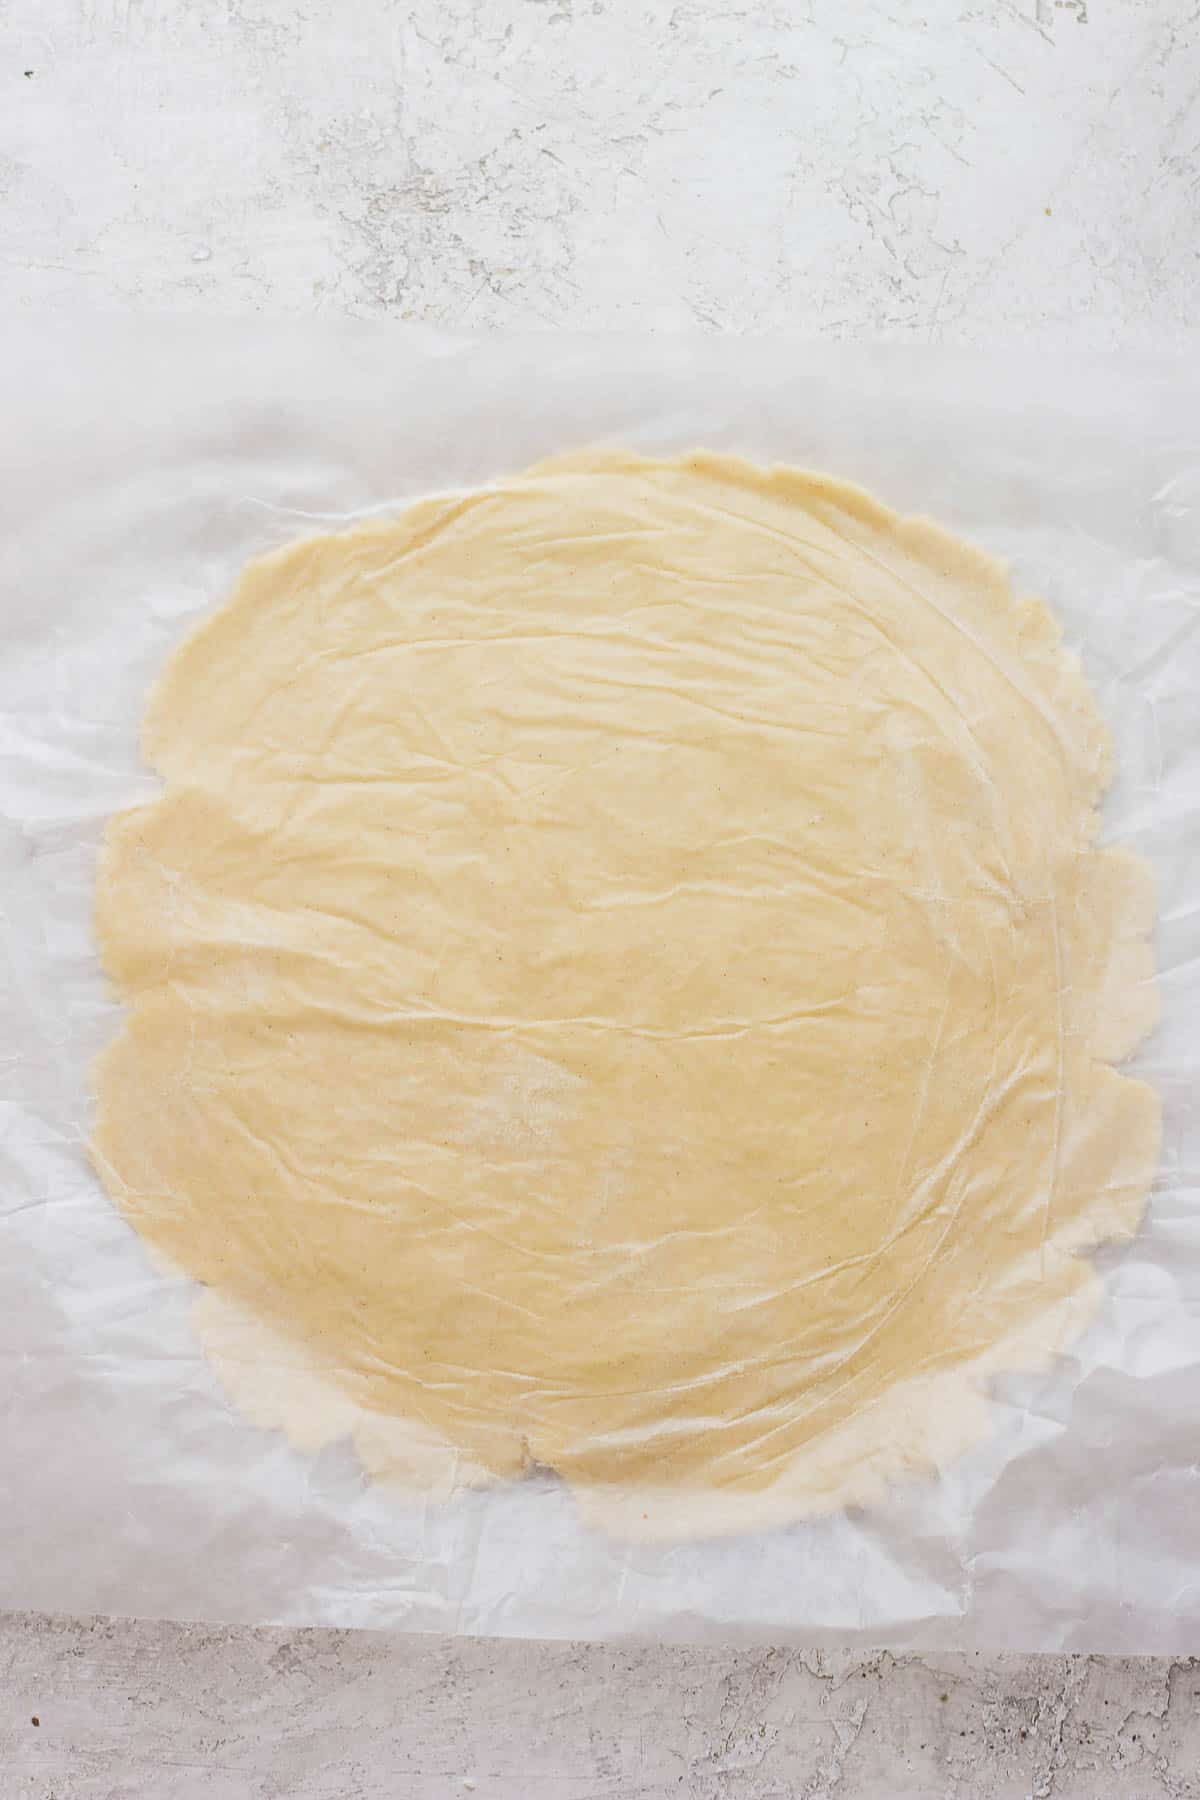 Dough rolled out into a large circle between two pieces of wax paper.